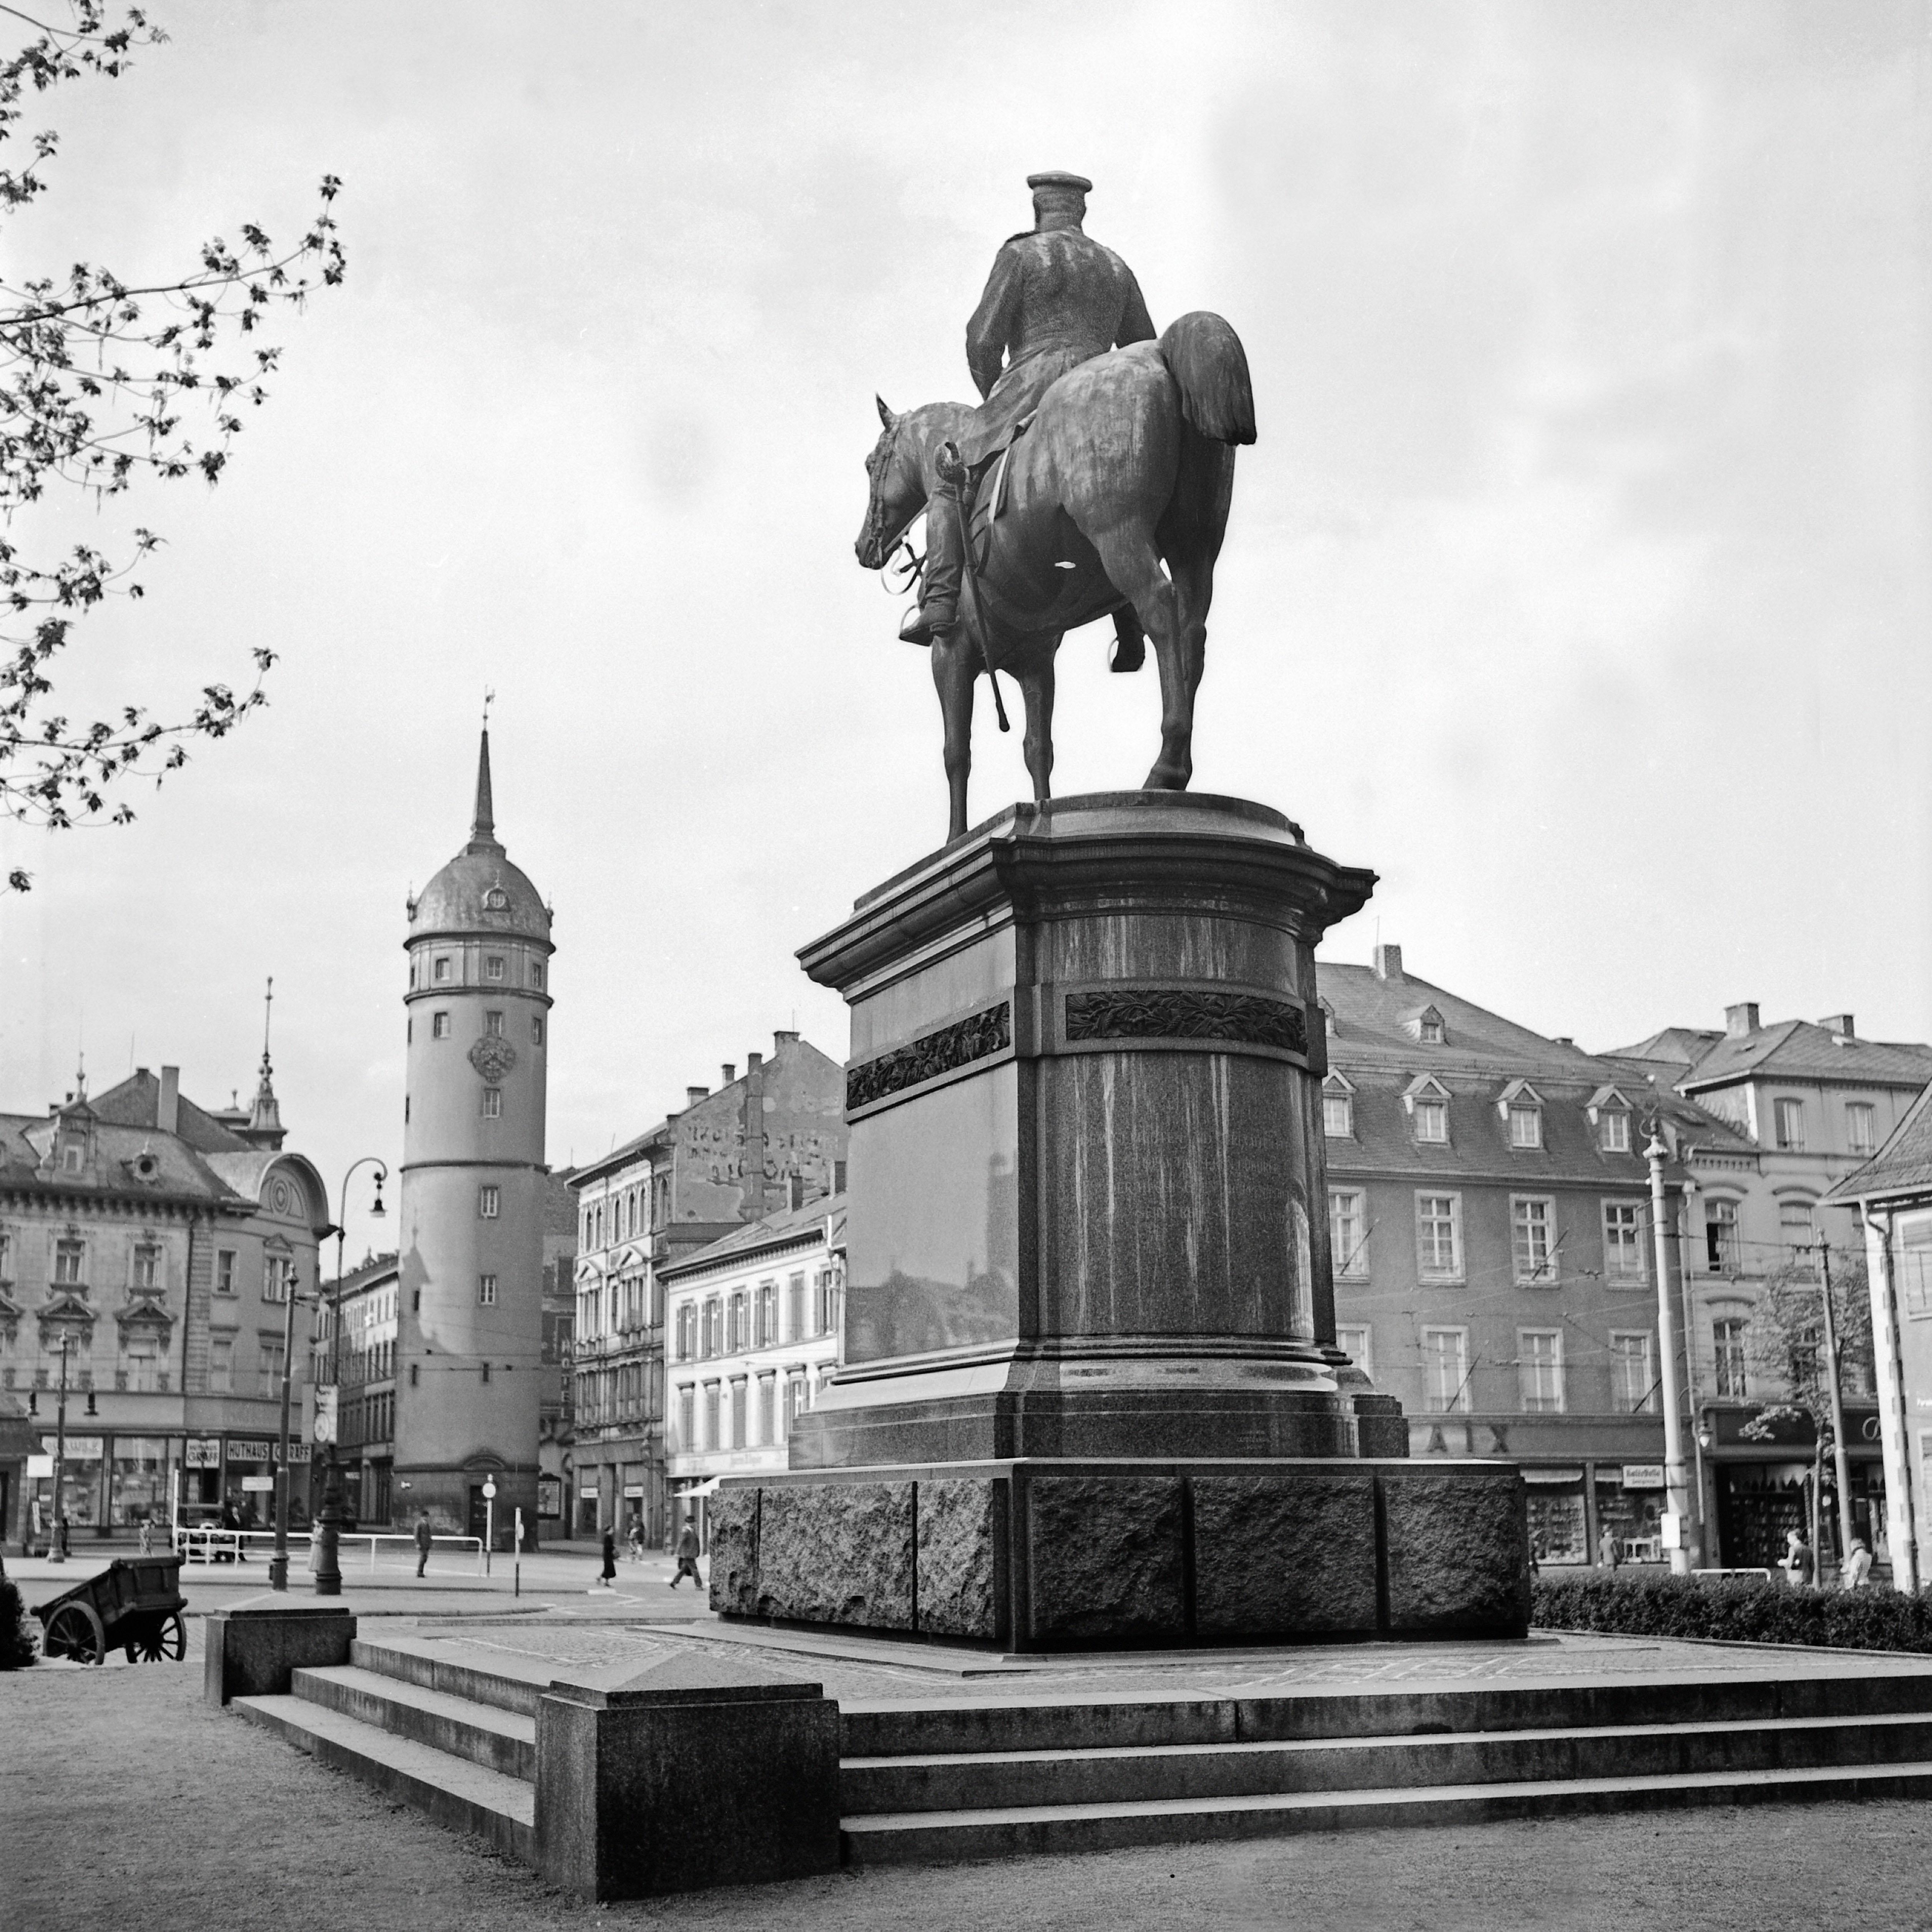 Karl Heinrich Lämmel Black and White Photograph - Market square with monument Louis IV Darmstadt, Germany 1938 Printed Later 